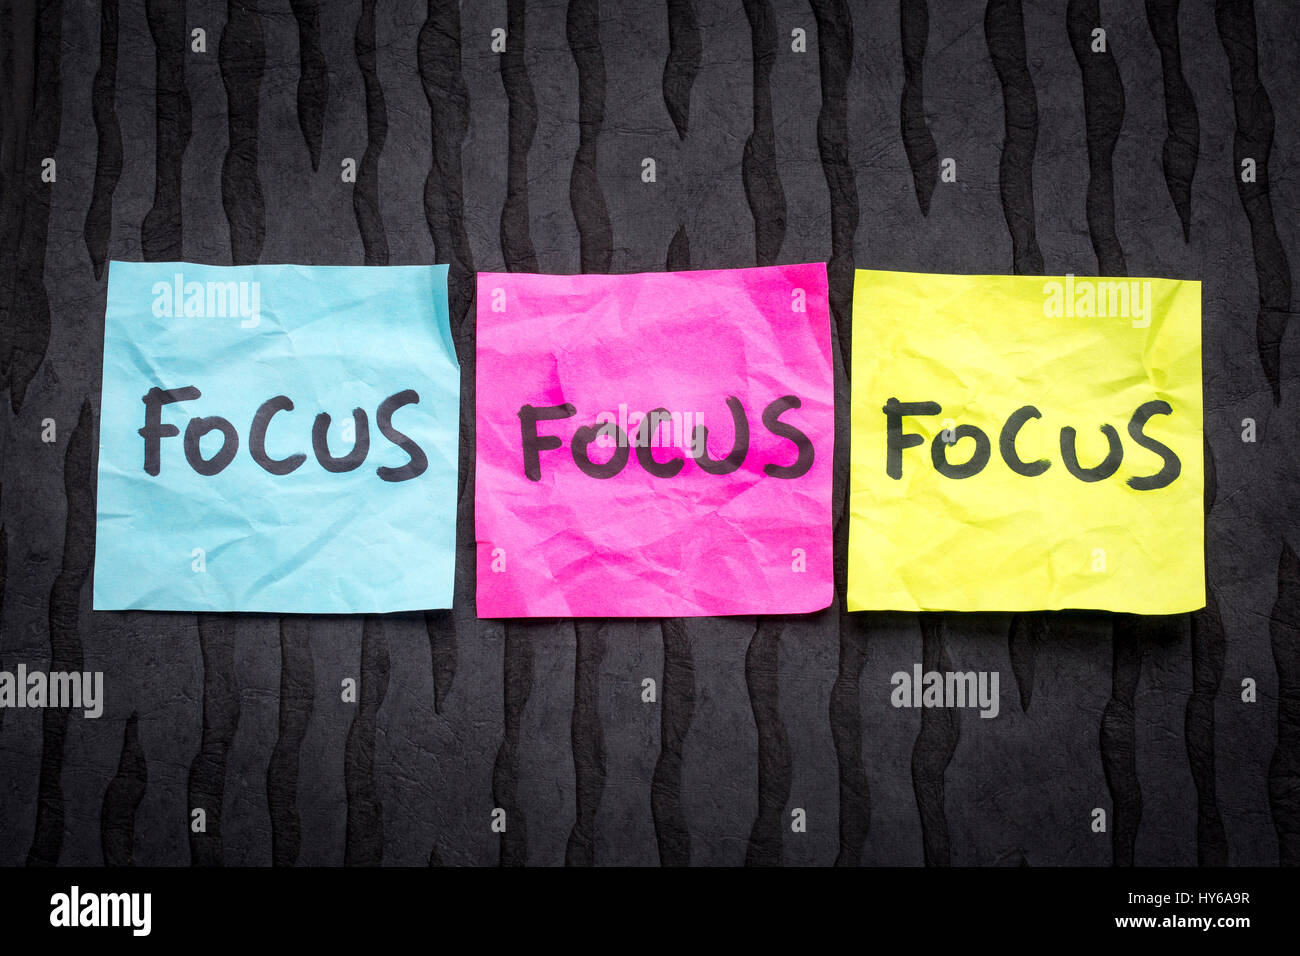 Focus concept - handwriting on sticky notes against black lokta paper Stock Photo